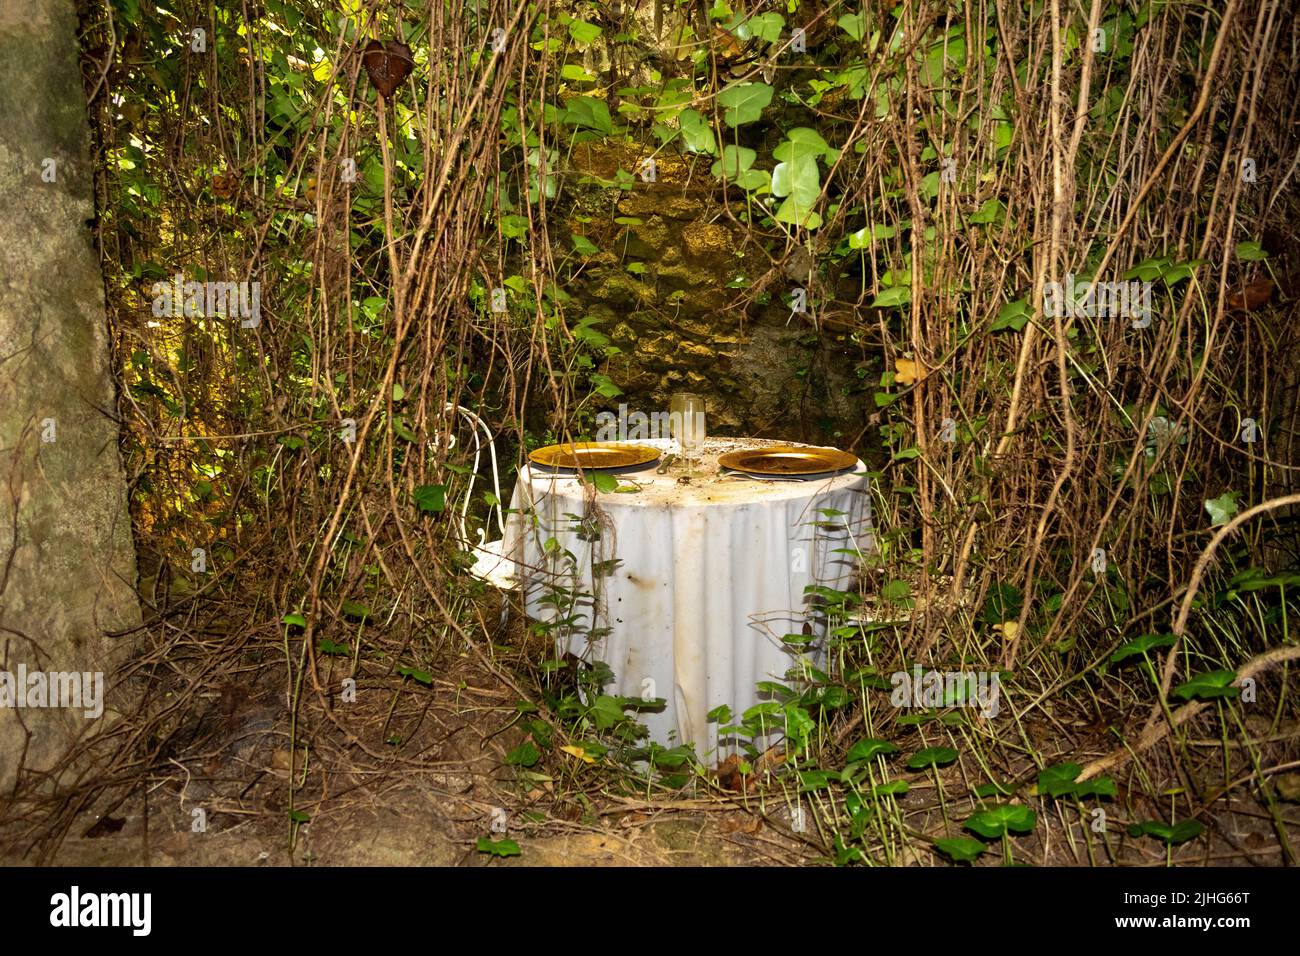 Very Strange and spooky place setting for two person with table set for two among the undergrowth in the caves under Château de la Bourdaisière France Stock Photo